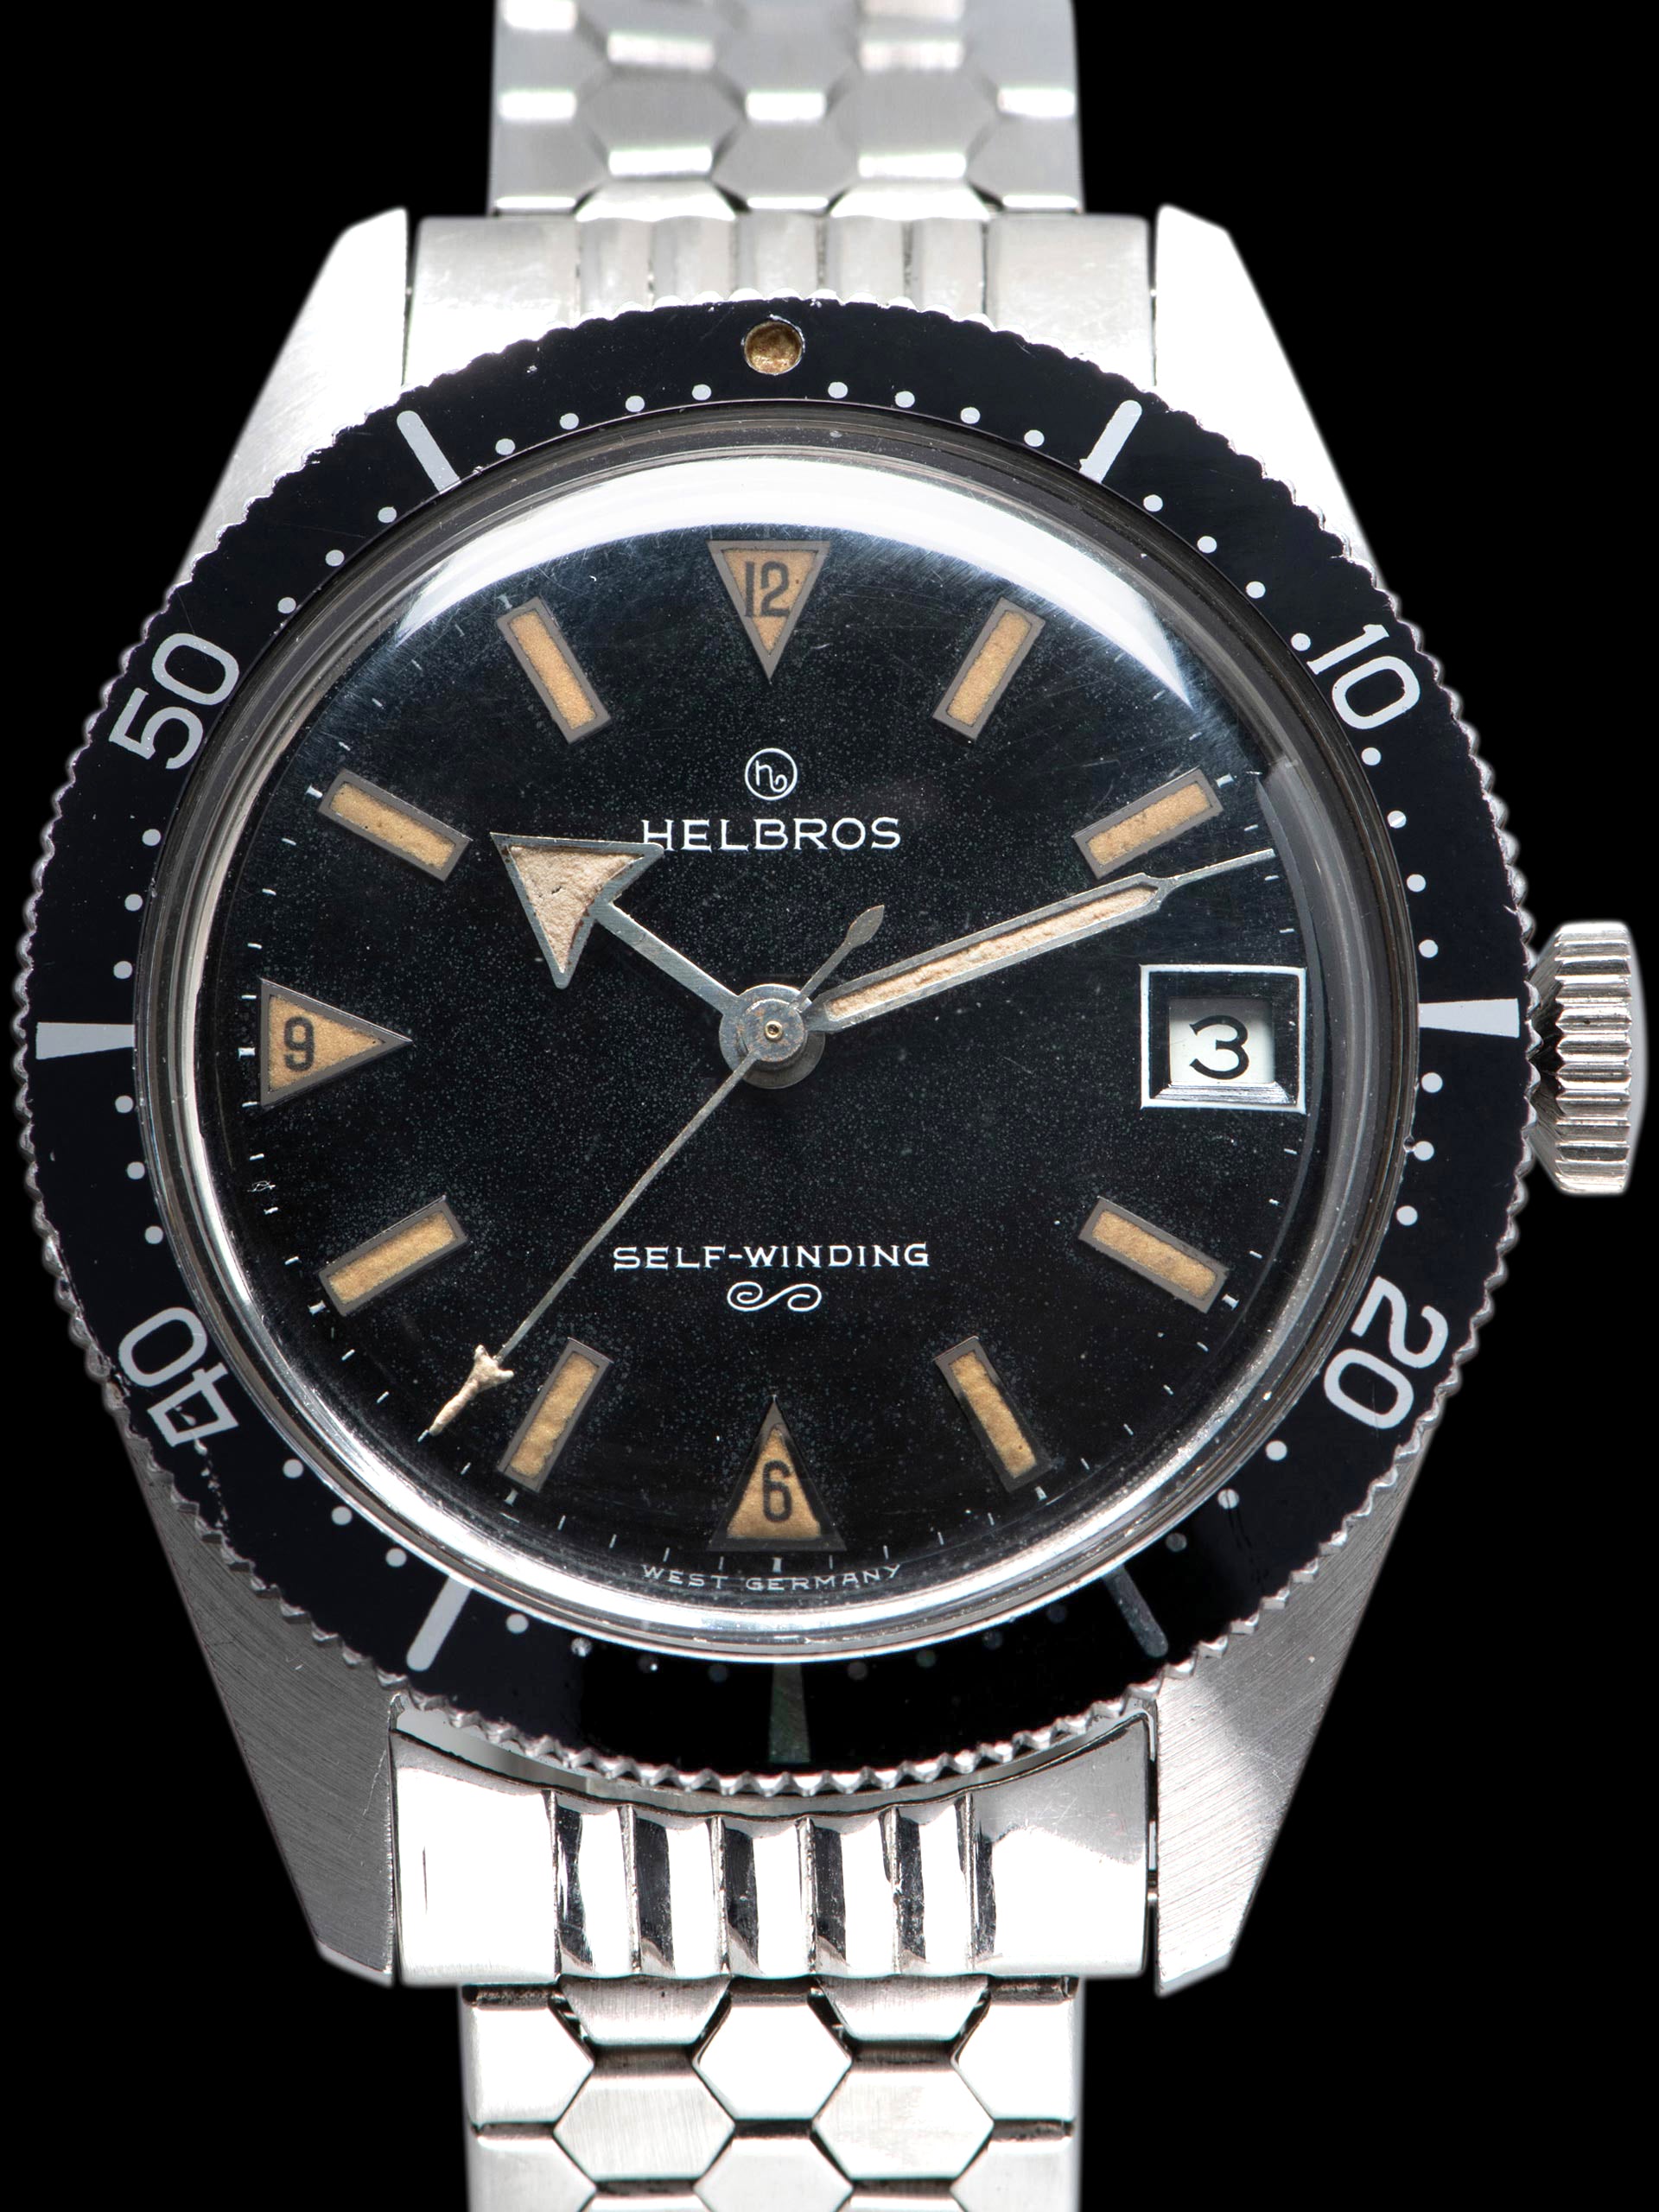 1960s Helbros Automatic Skin Diver